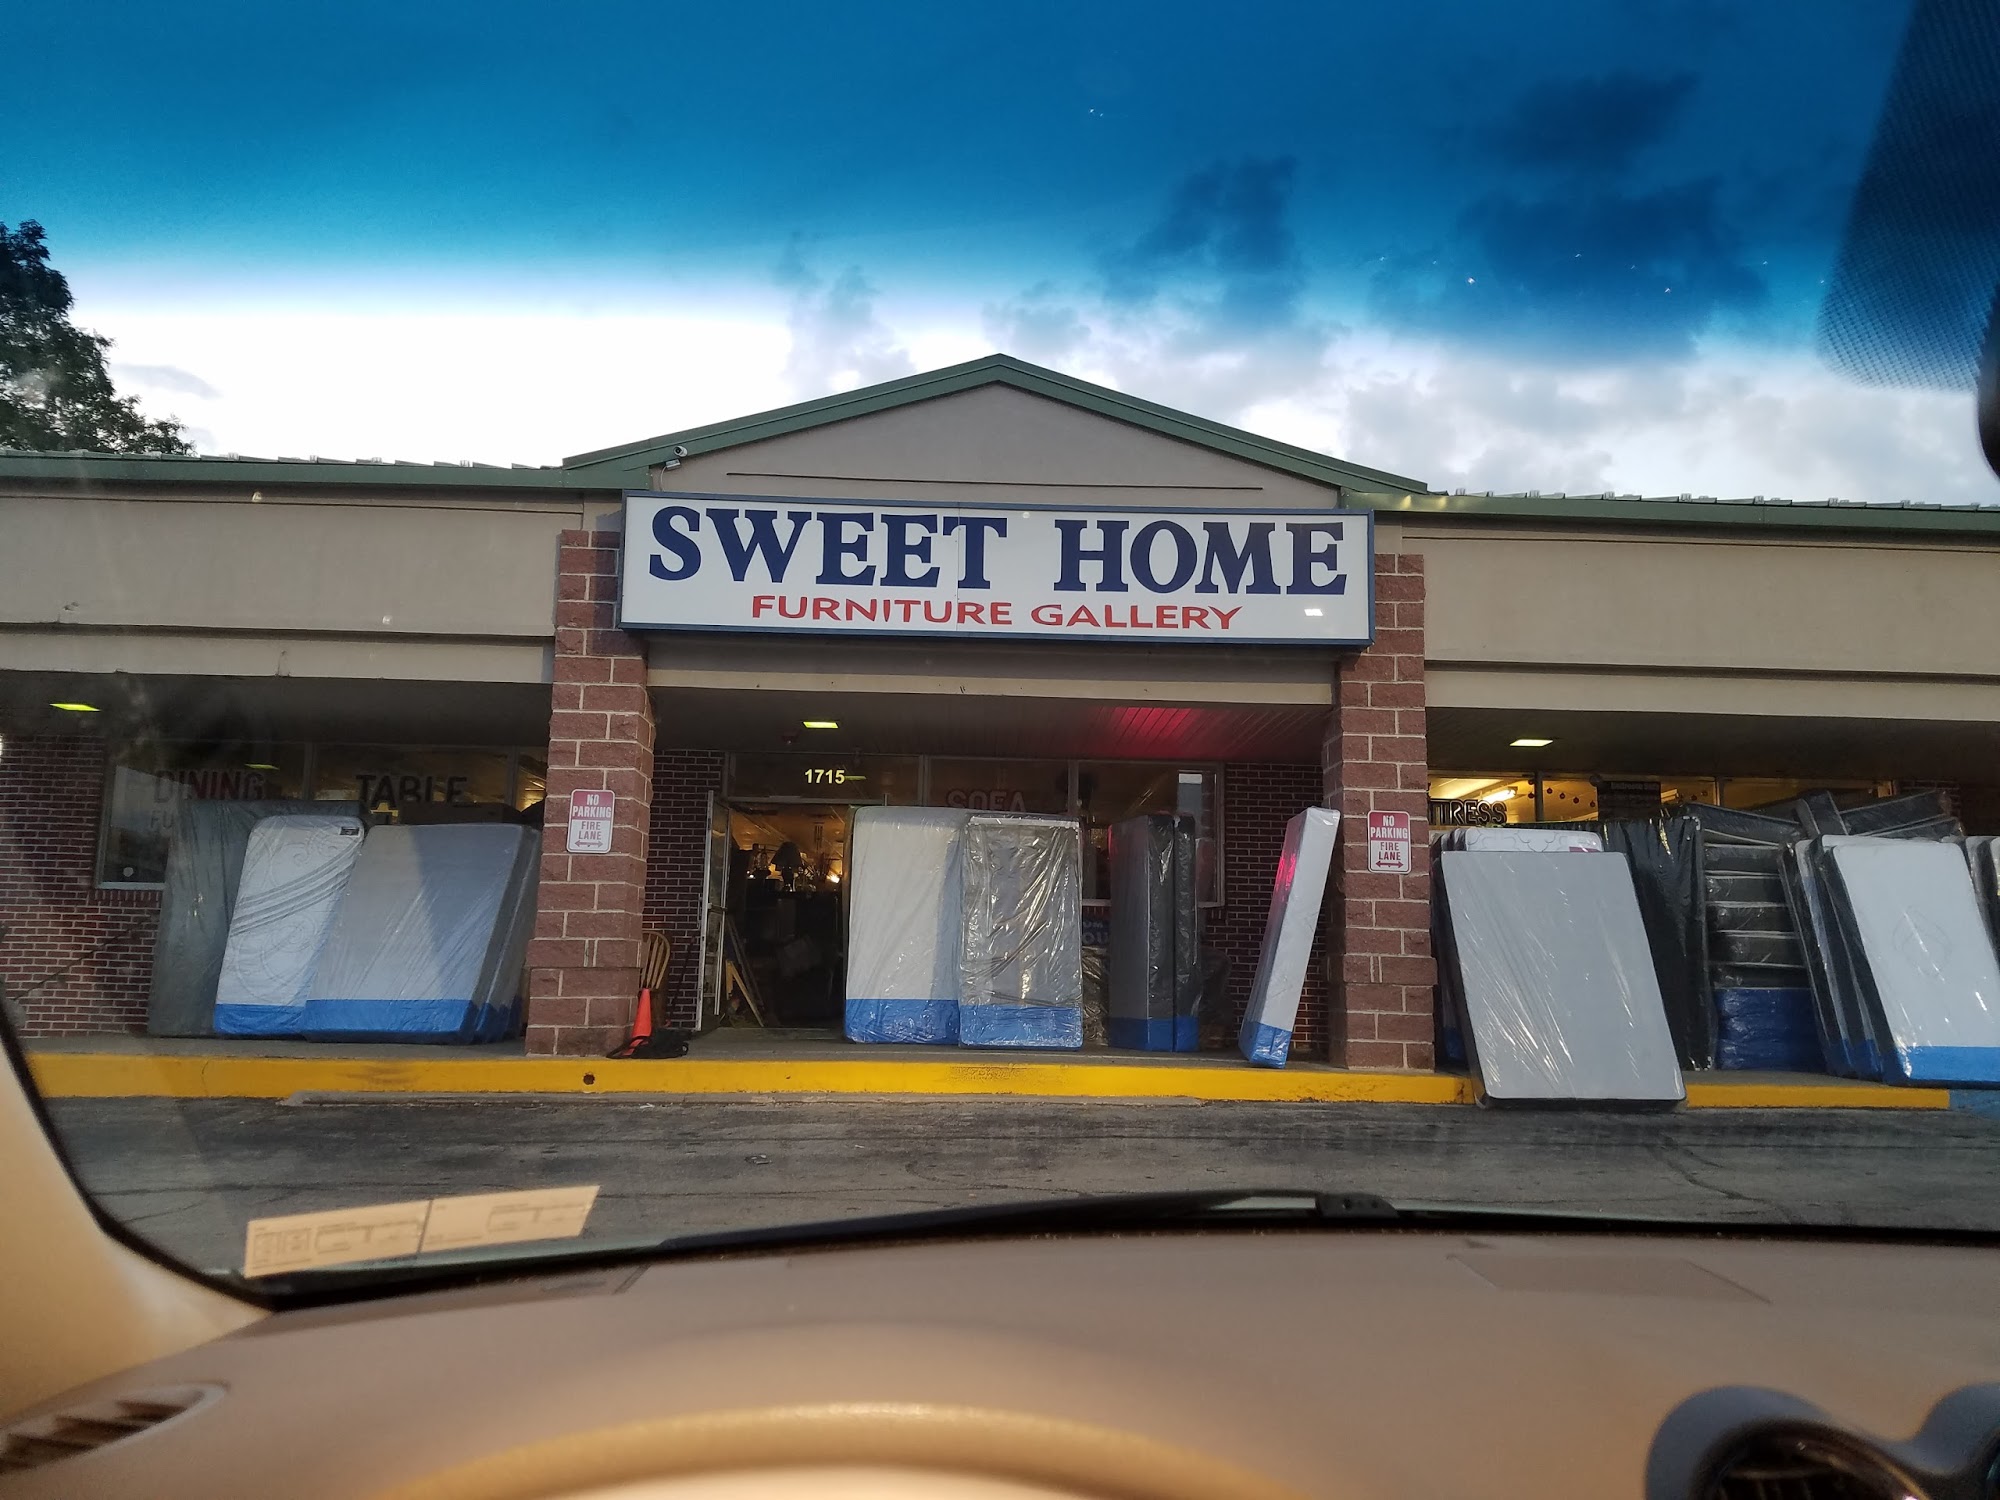 Sweet Home Furniture Gallery